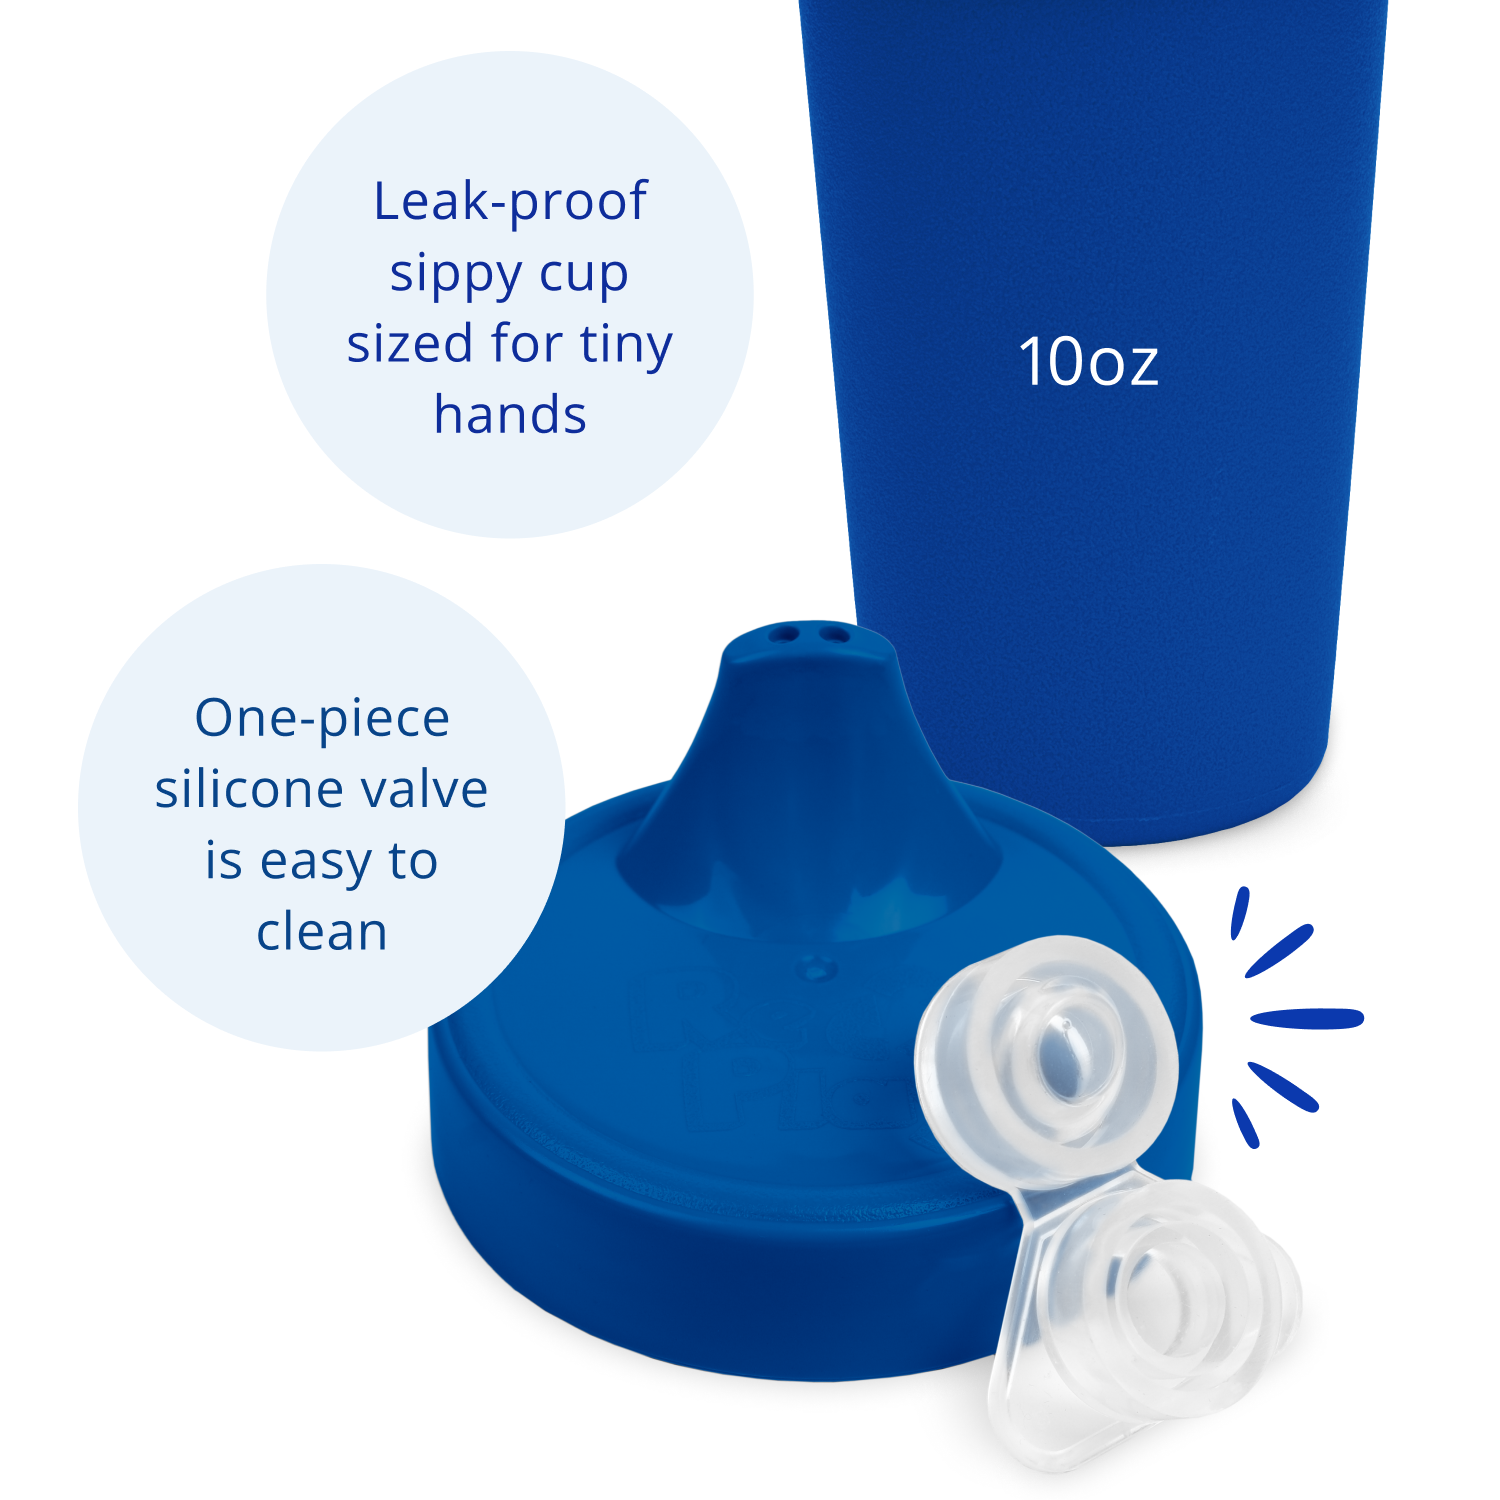 Re-play Spill Proof Cup - 10oz : Target